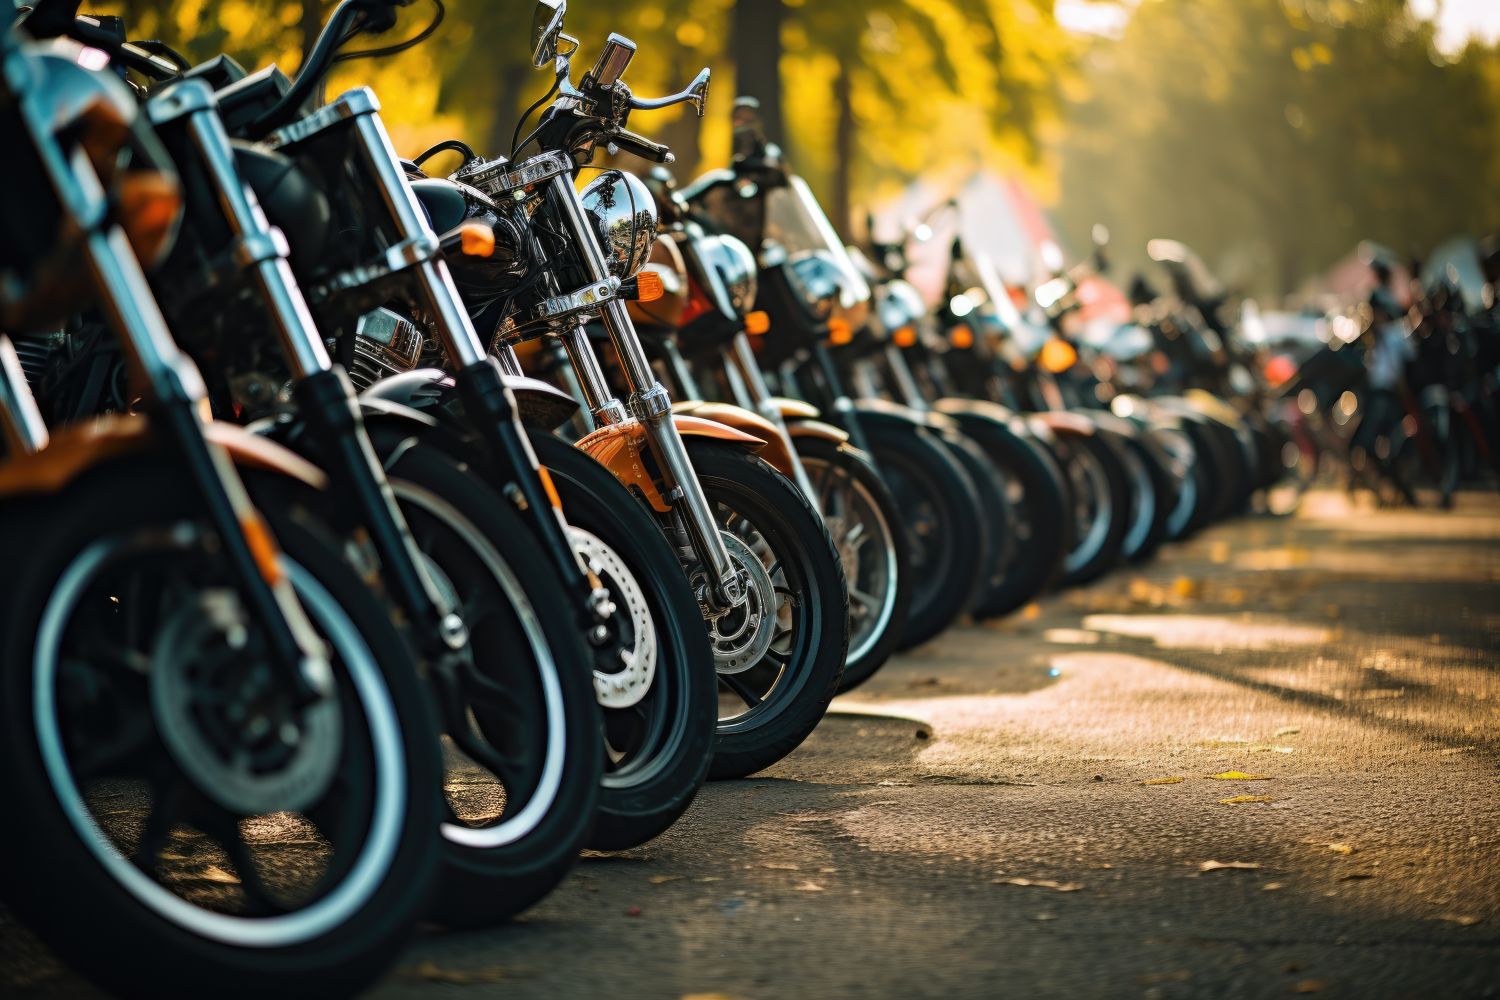 Image of a row of motorcycles parked on the street